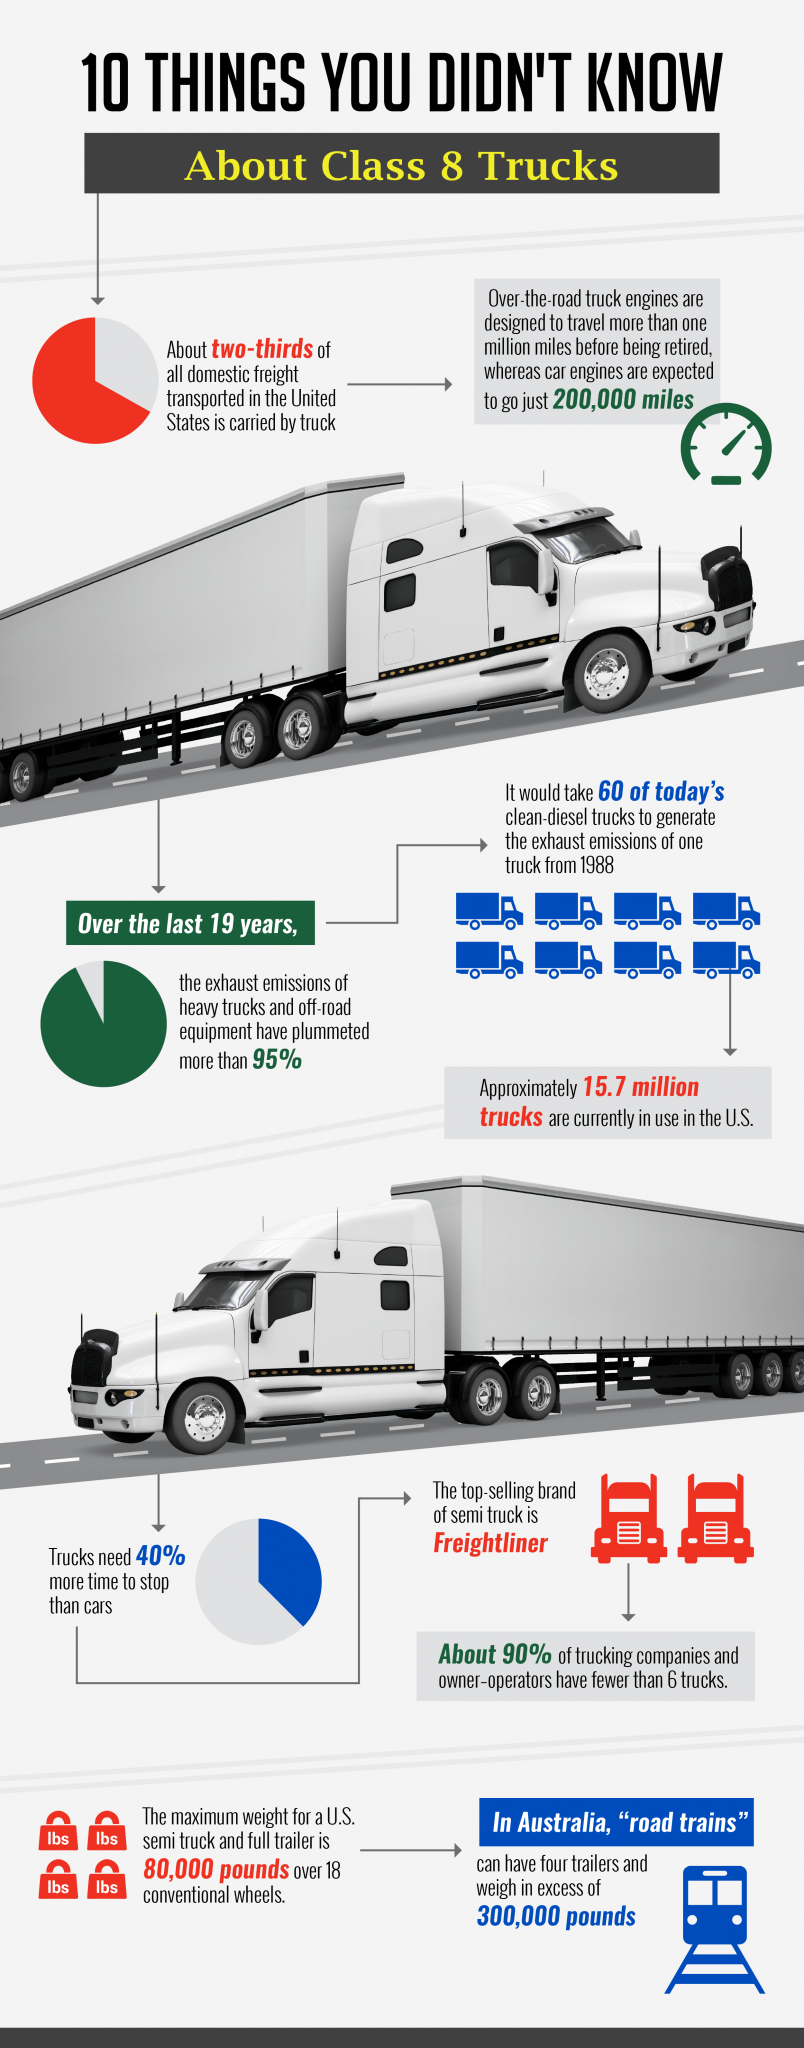 INFOGRAPHIC: 10 Things You Didn't Know About Class 8 Trucks